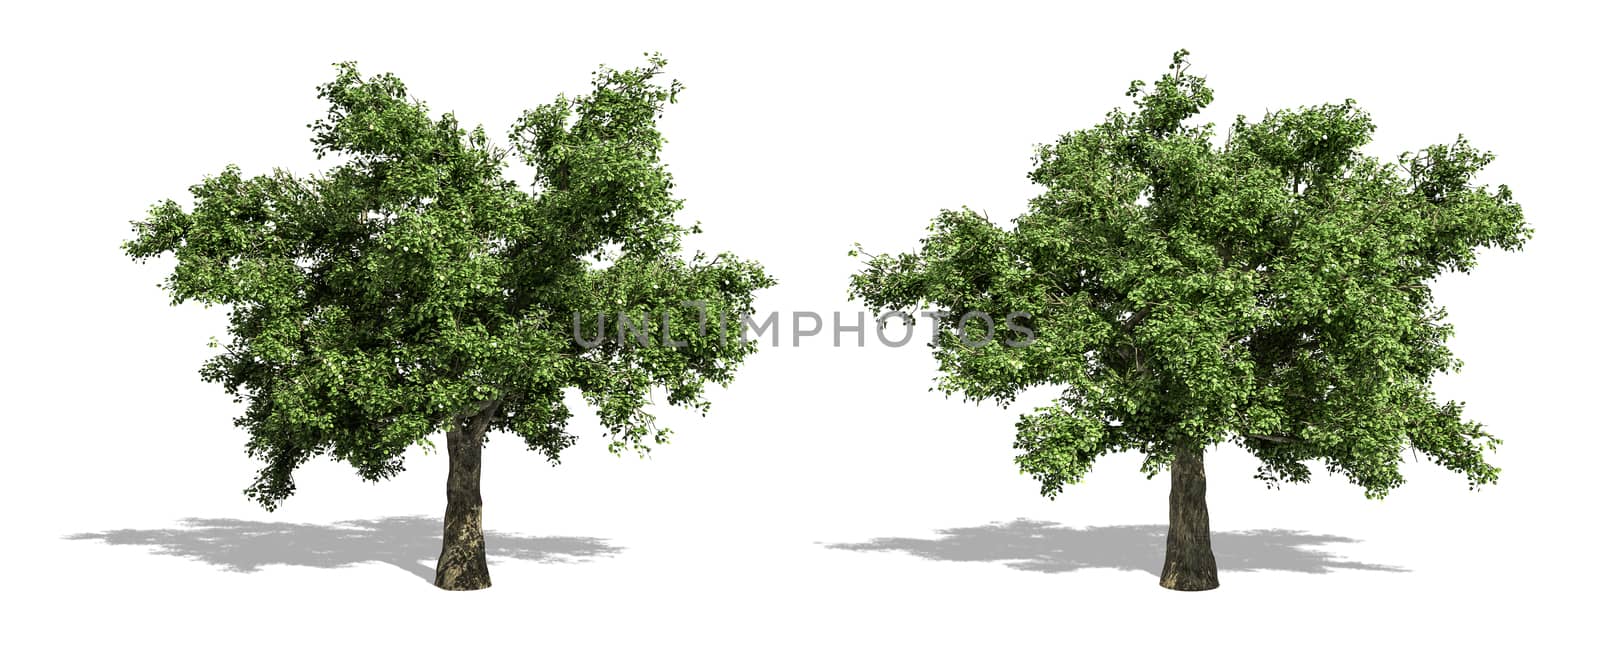 Beautiful Quercus tree isolated and cutting on a white background with clipping path. by anotestocker